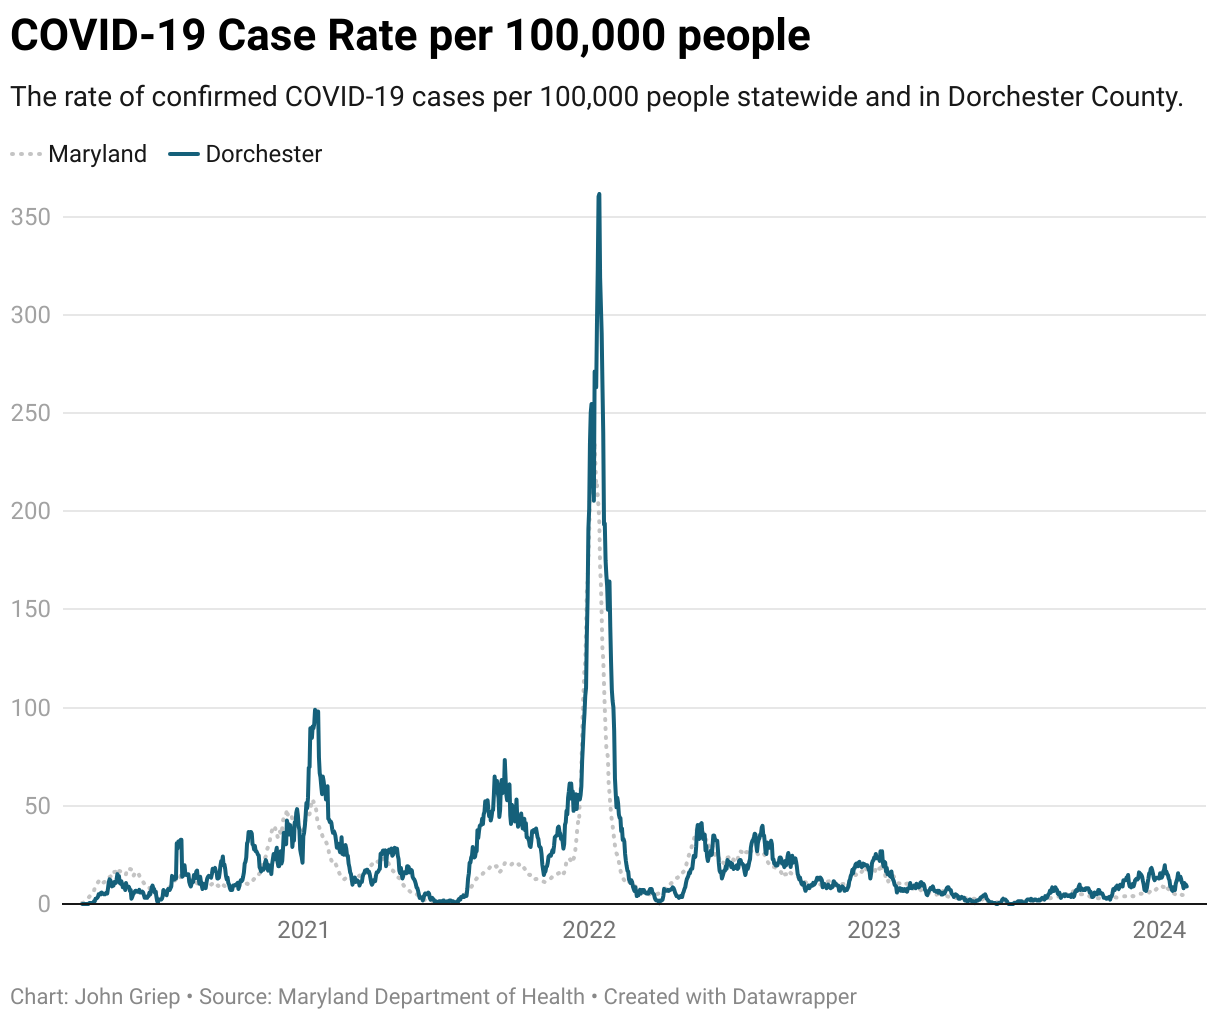 The rate of confirmed COVID-19 cases per 100,000 people statewide (dotted line) and in Dorchester County (solid line).